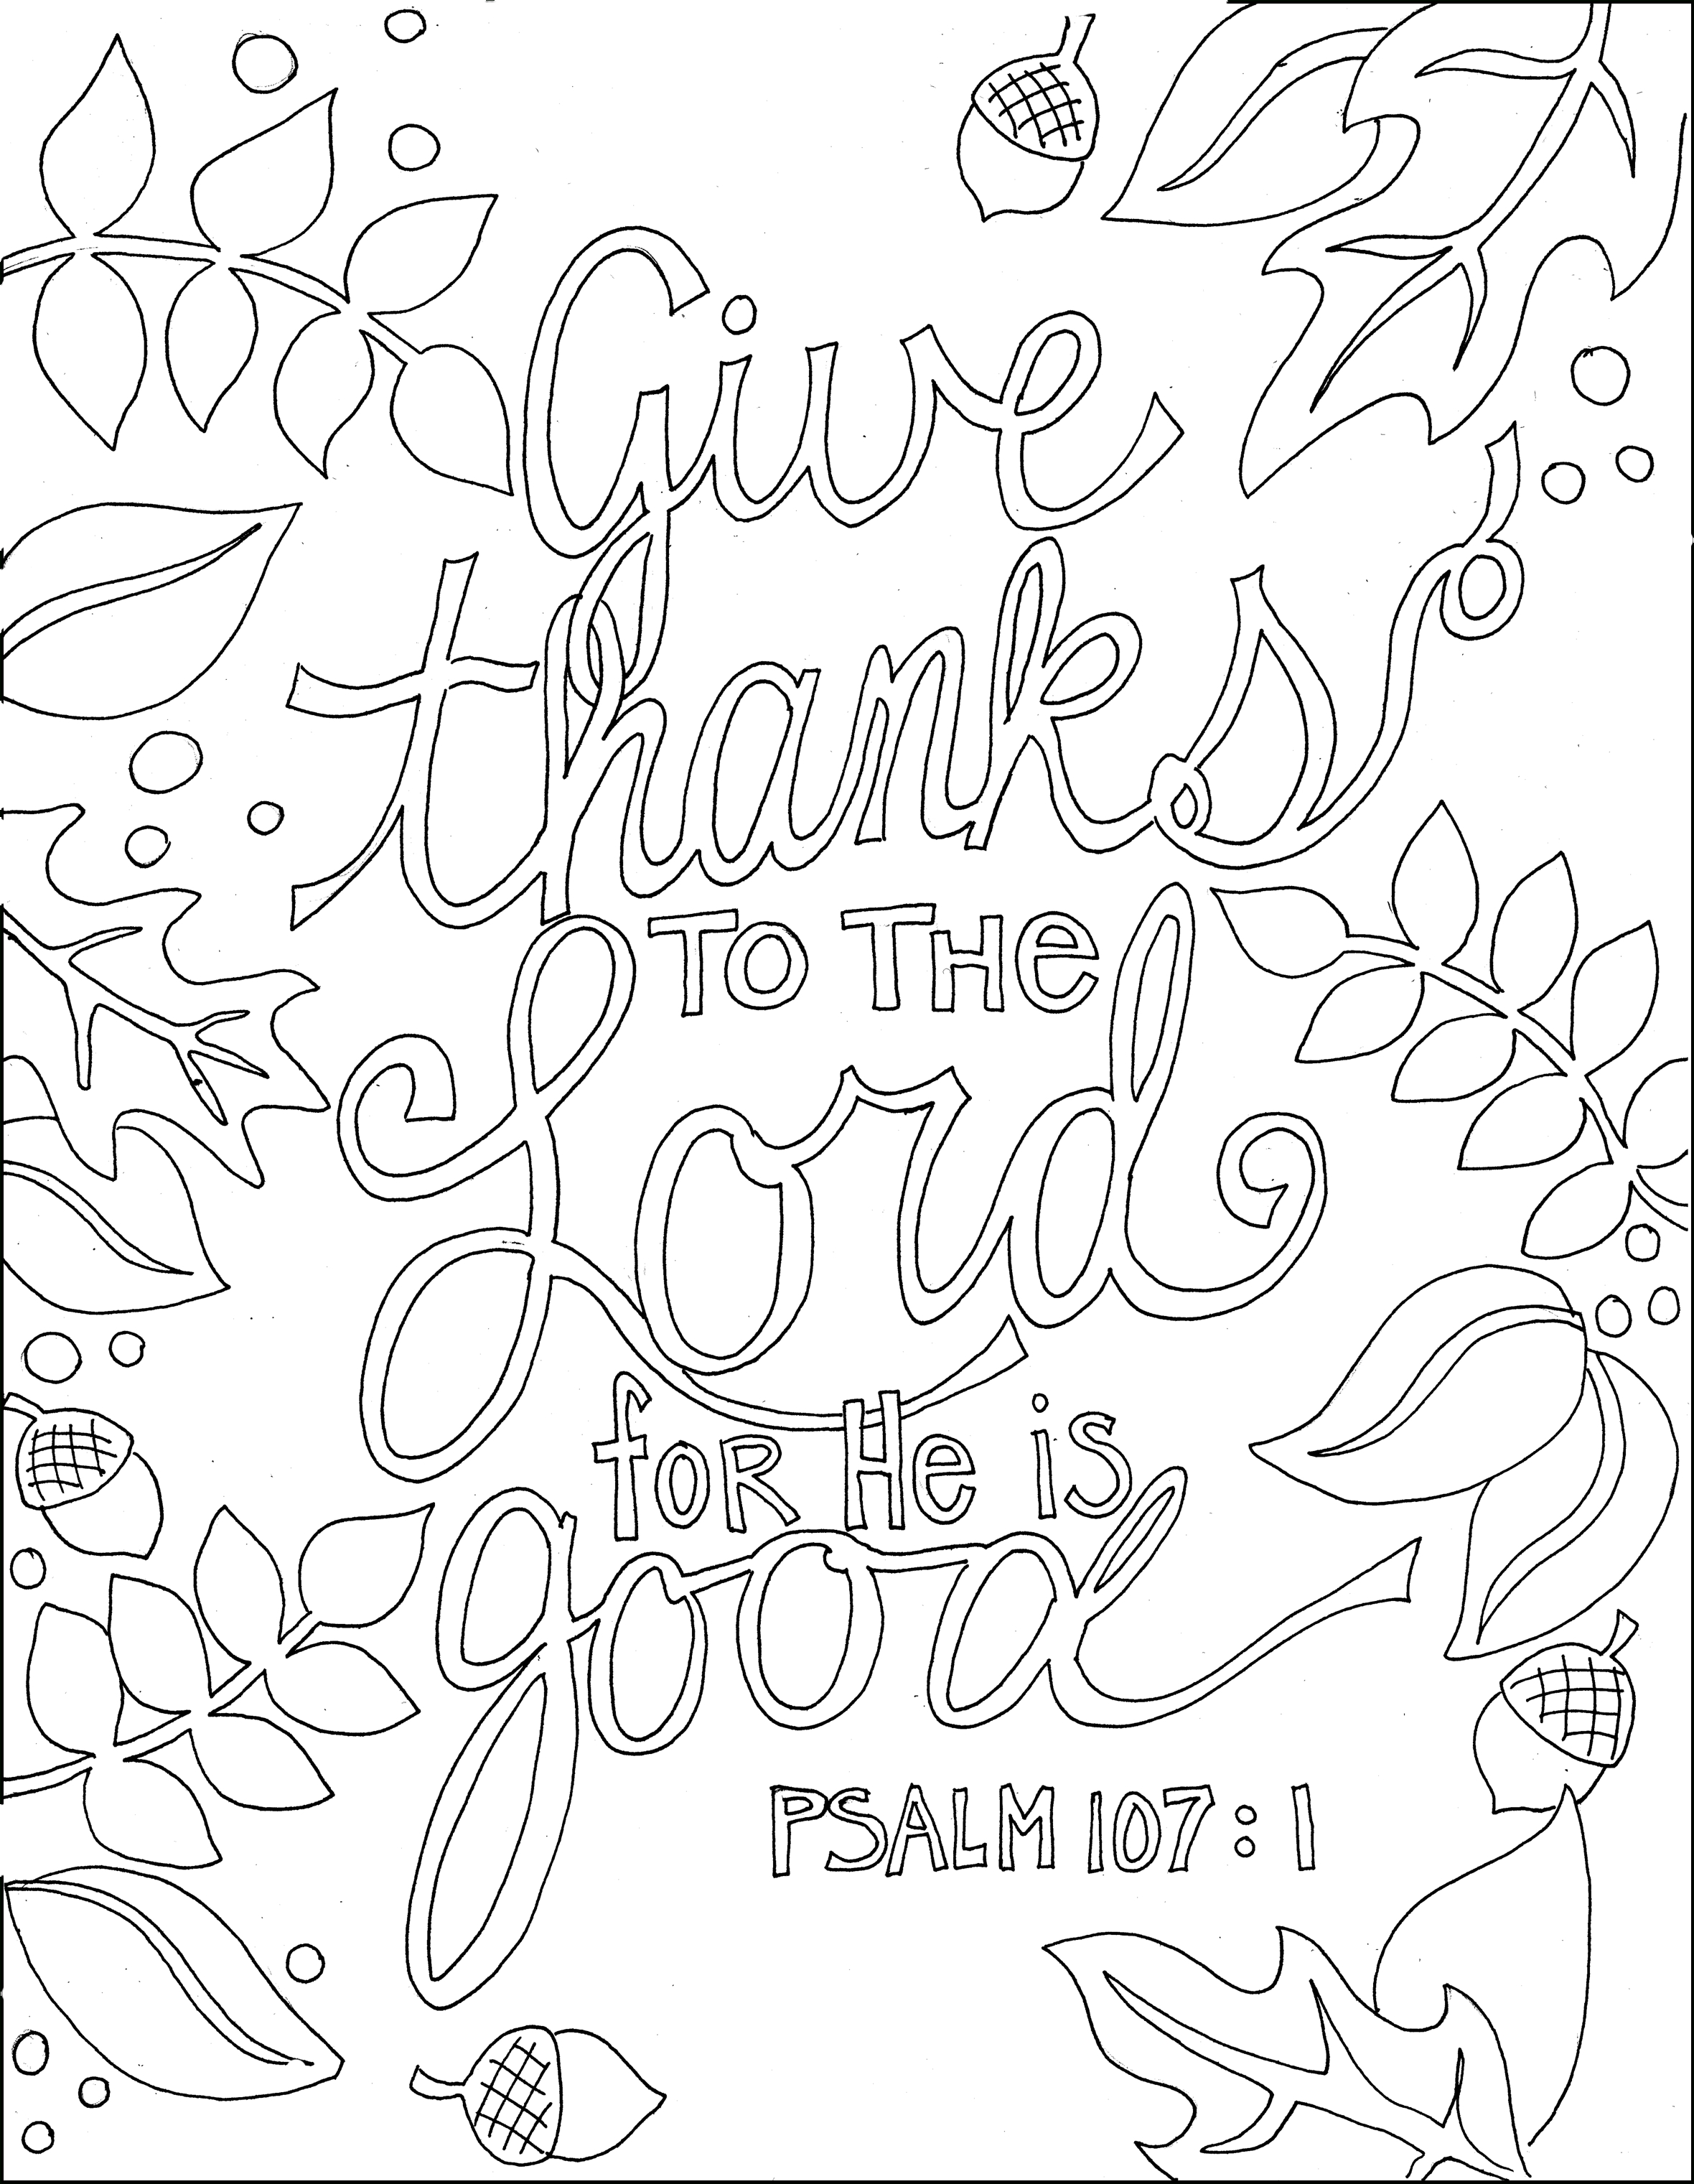 Coloring Book World ~ Free Bible Verse Coloring Pages For Adults - Free Printable Bible Coloring Pages With Verses